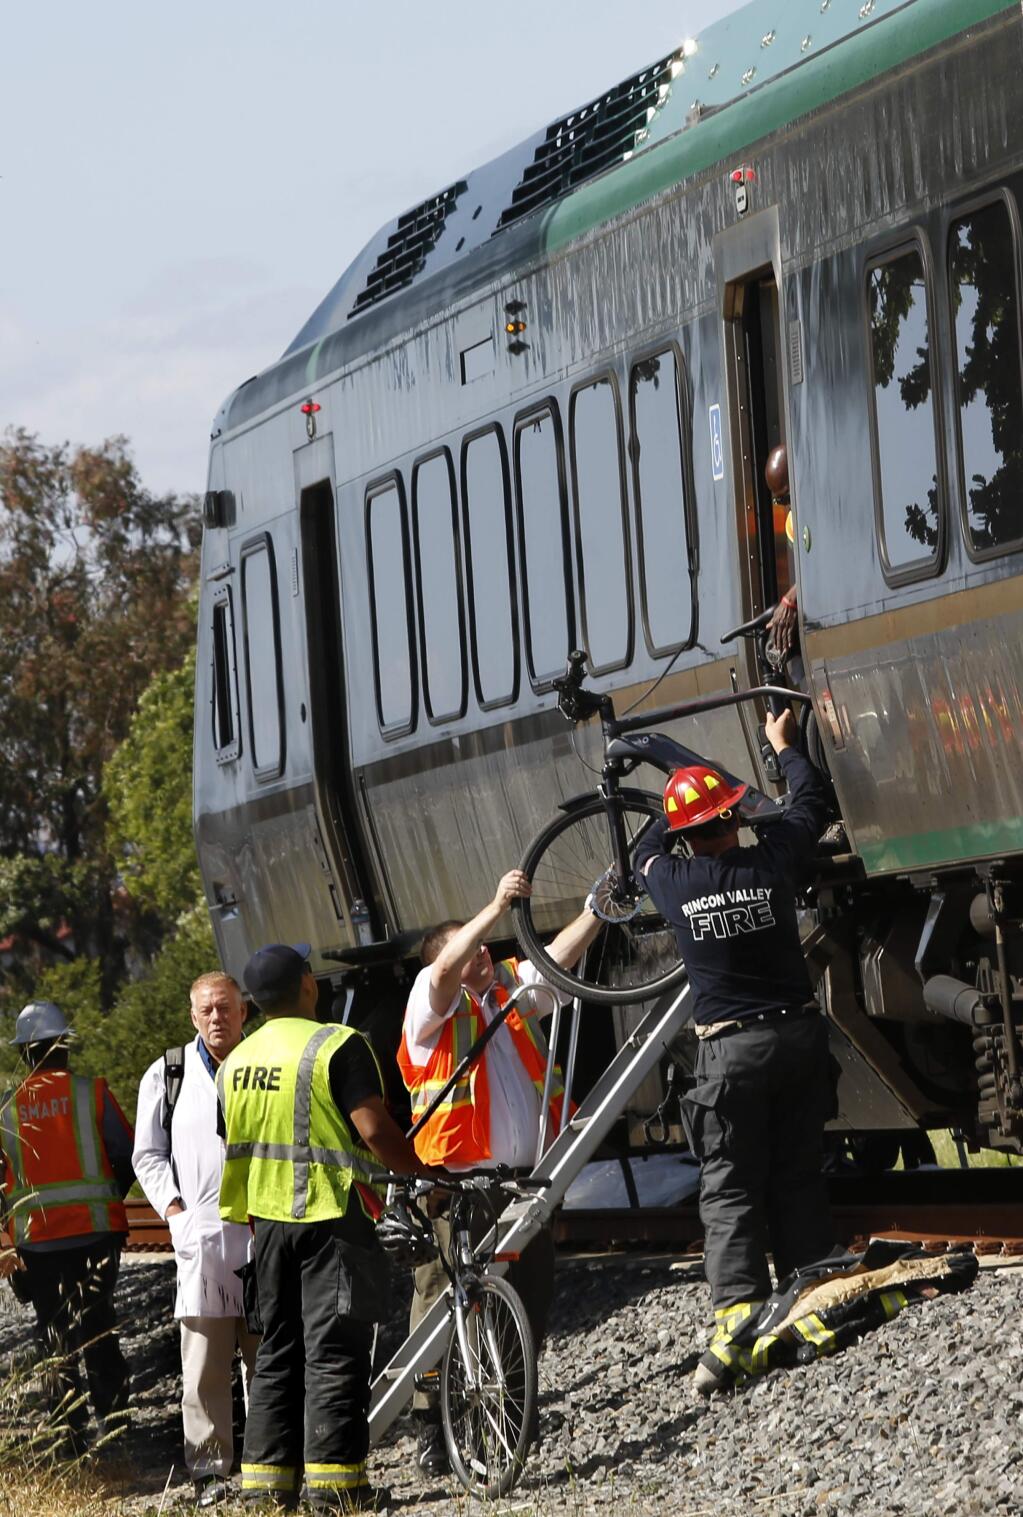 SMART officials and Rincon Valley firefighters unload passengers and bicycles from the damaged forward train car at the scene of a SMART train and truck collision at the Todd Road crossing near Santa Rosa on Thursday, May 31, 2018. (BETH SCHLANKER/ PD)